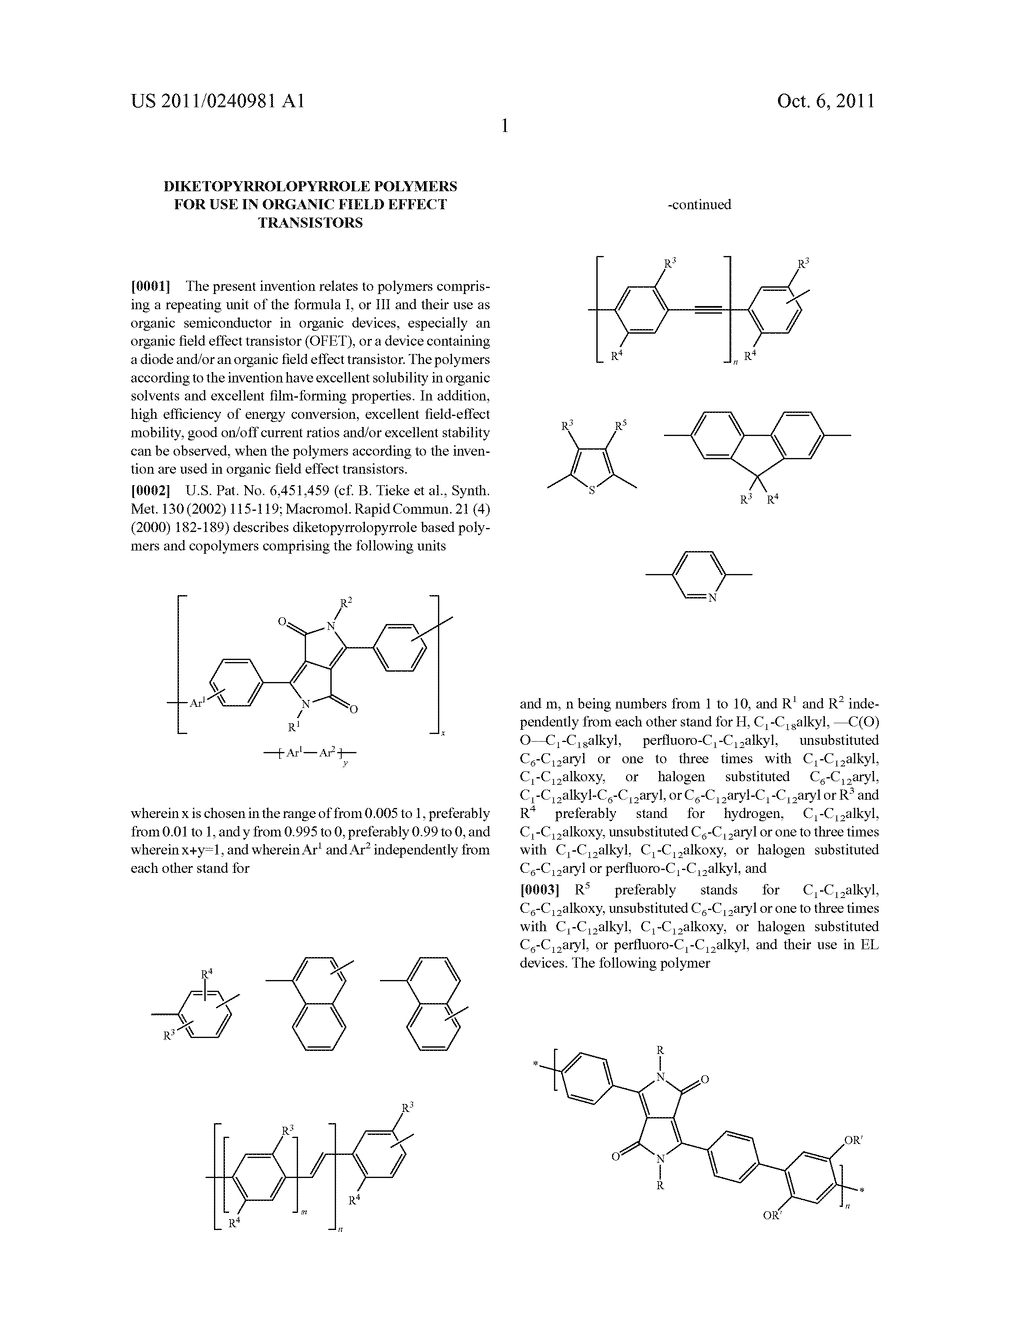 DIKETOPYRROLOPYRROLE POLYMERS FOR USE IN ORGANIC FIELD EFFECT TRANSISTORS - diagram, schematic, and image 03